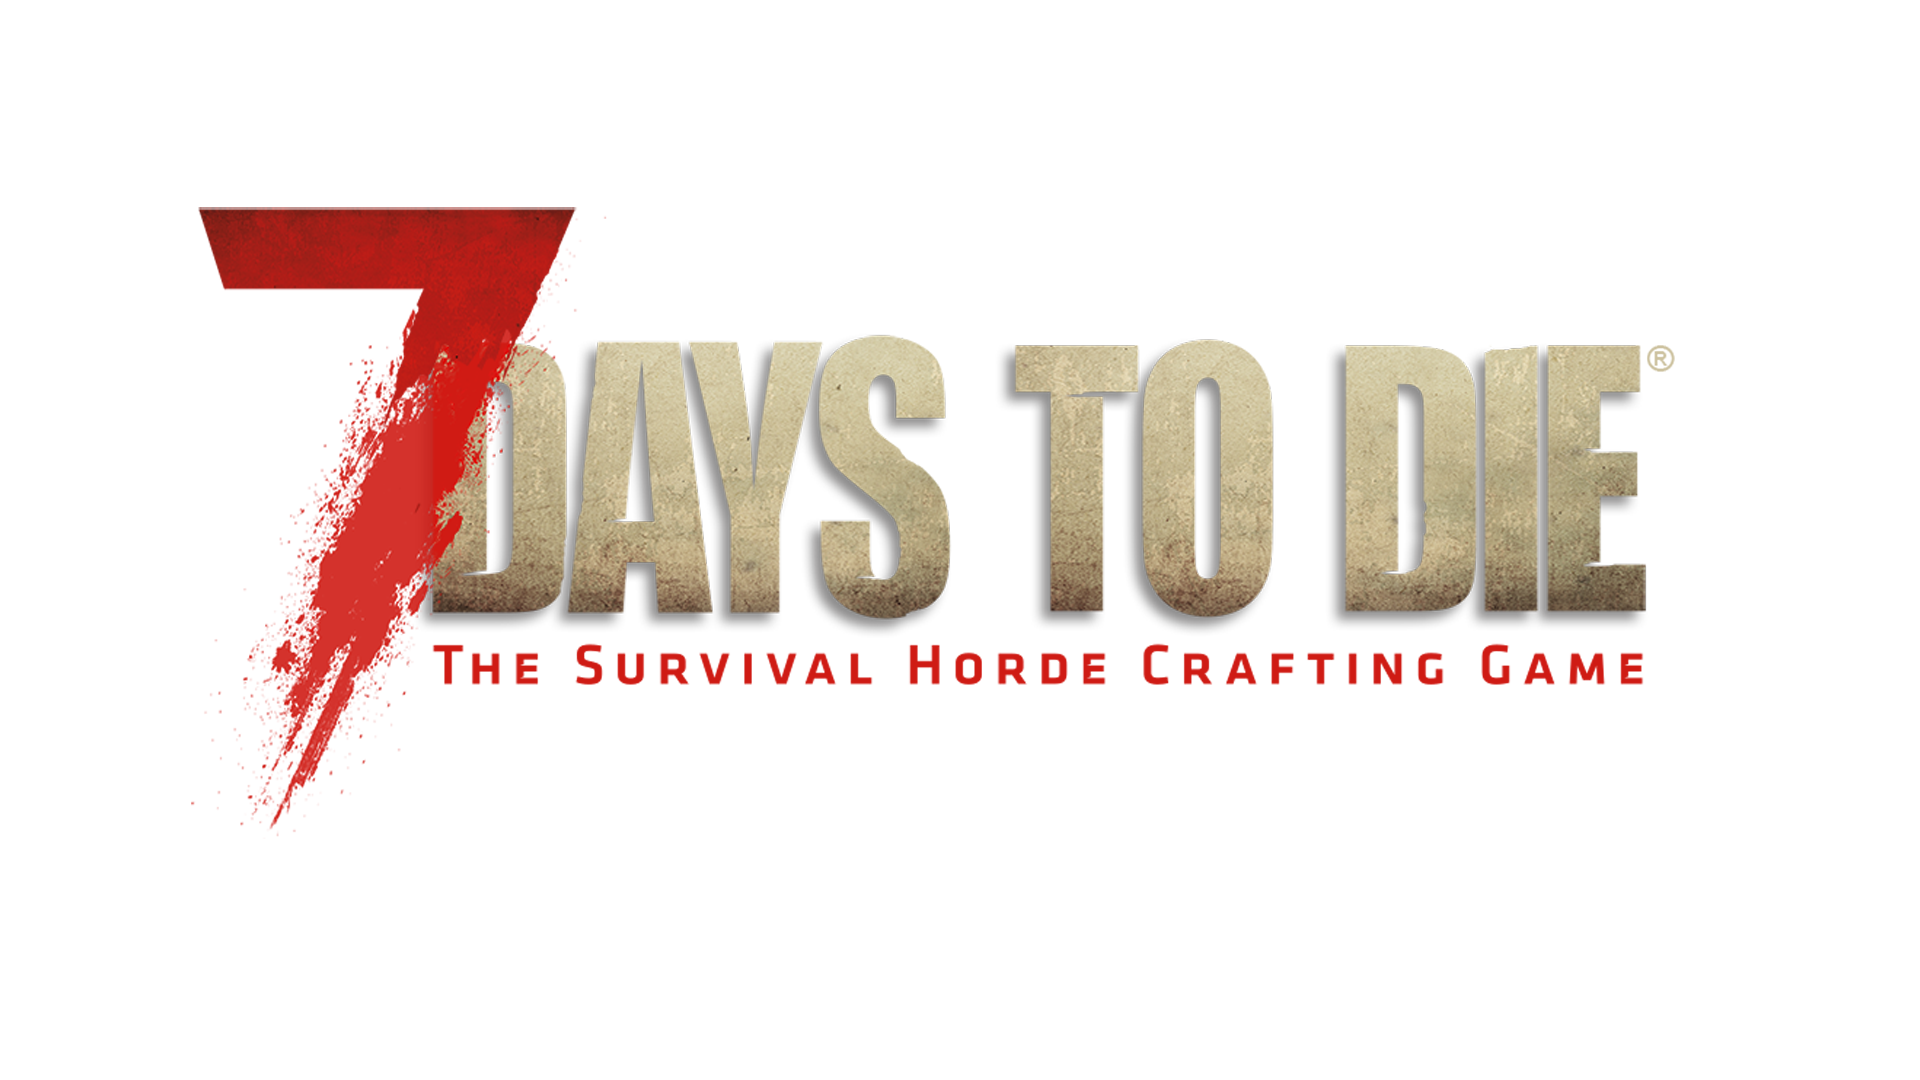 The 7 days to die steam фото 111